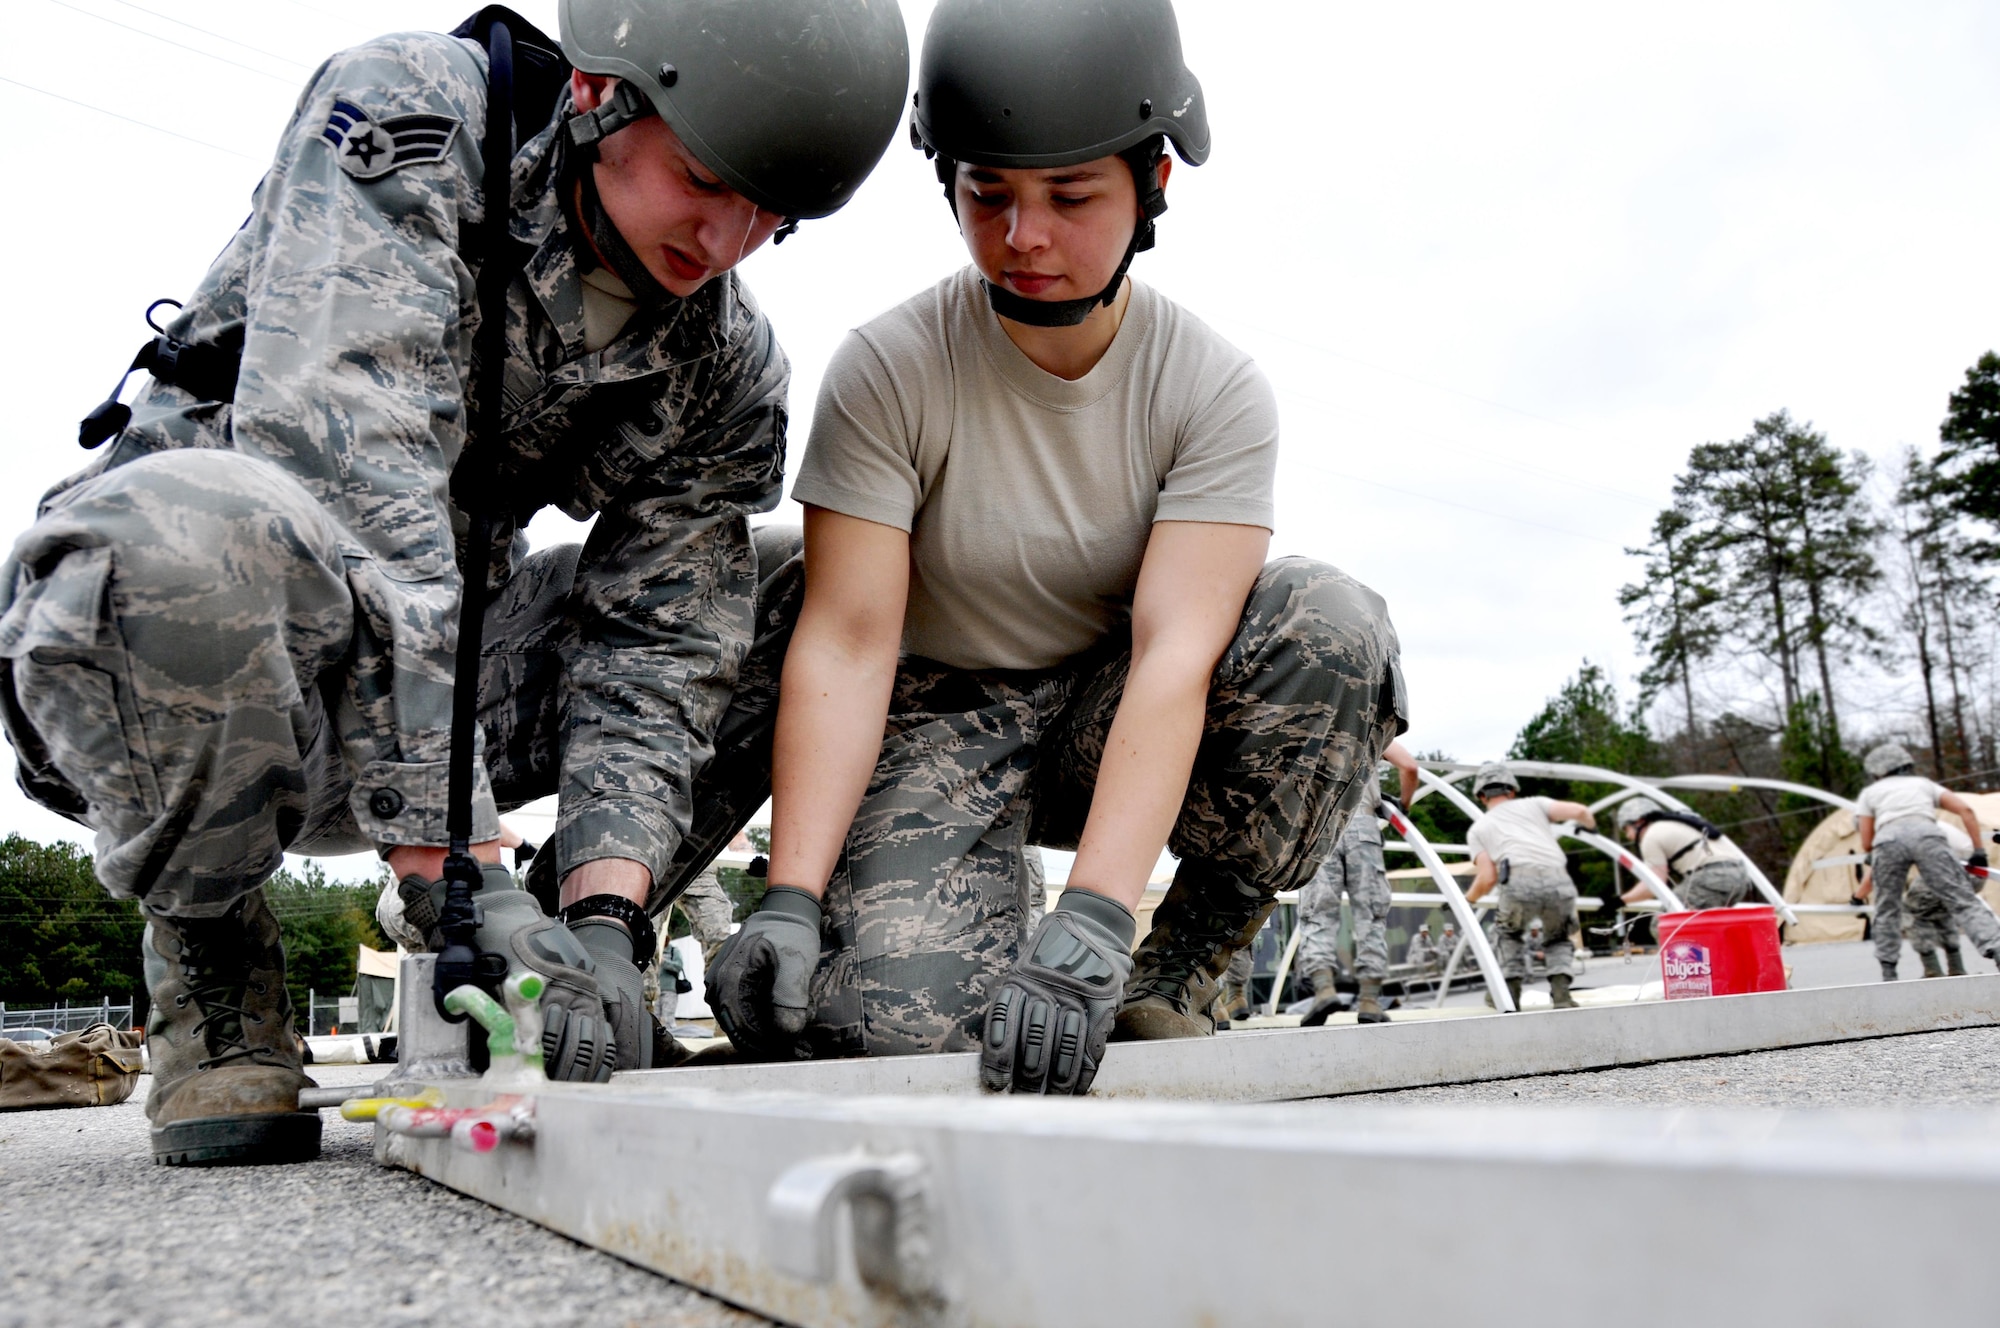 Senior Airmen Dominic Maggs and Staff Sgt. Kelsey Ansen, both 911th Force Support Squadron, Pittsburgh, Pa., place pipes to build a tent during the Readiness Challenge for Force Support Silver Flag at Dobbins Air Reserve Base, Georgia, March 12, 2015. About 70 Airmen on teams from Peterson Air Force Base, Colorado; the 445th FSS from Wright-Patterson Air Force Base, Ohio; the 908th FSS from Maxwell AFB, Alabama; the 910th FSS from Youngstown ARB, Ohio; the 911th FSS from Pittsburgh, Pennsylvania; and the 934th FSS from Minneapolis – St. Paul, Minnesota competed in FS Silver Flag. (U.S. Air Force photo/Senior Airman Daniel Phelps)